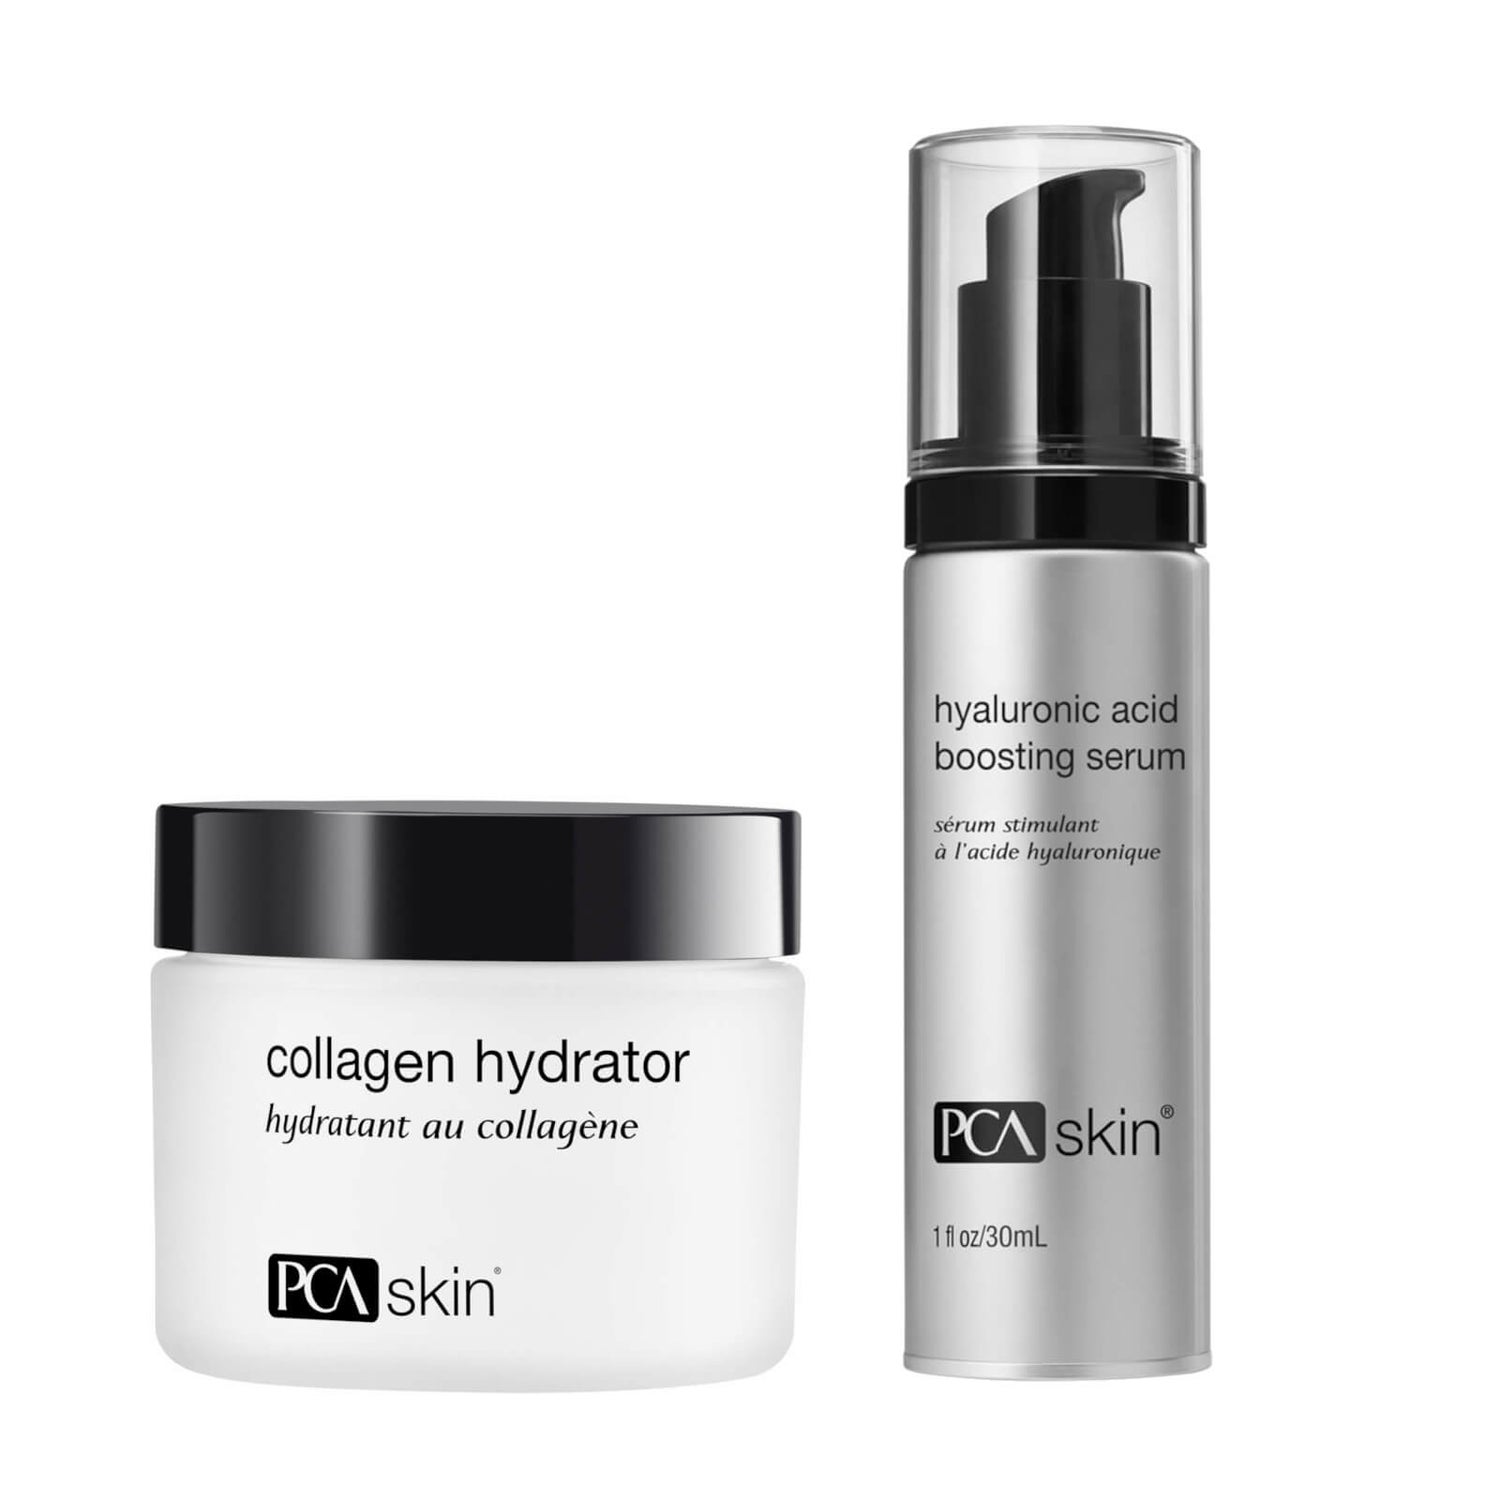 PCA SKIN Exclusive Hydrating Duo